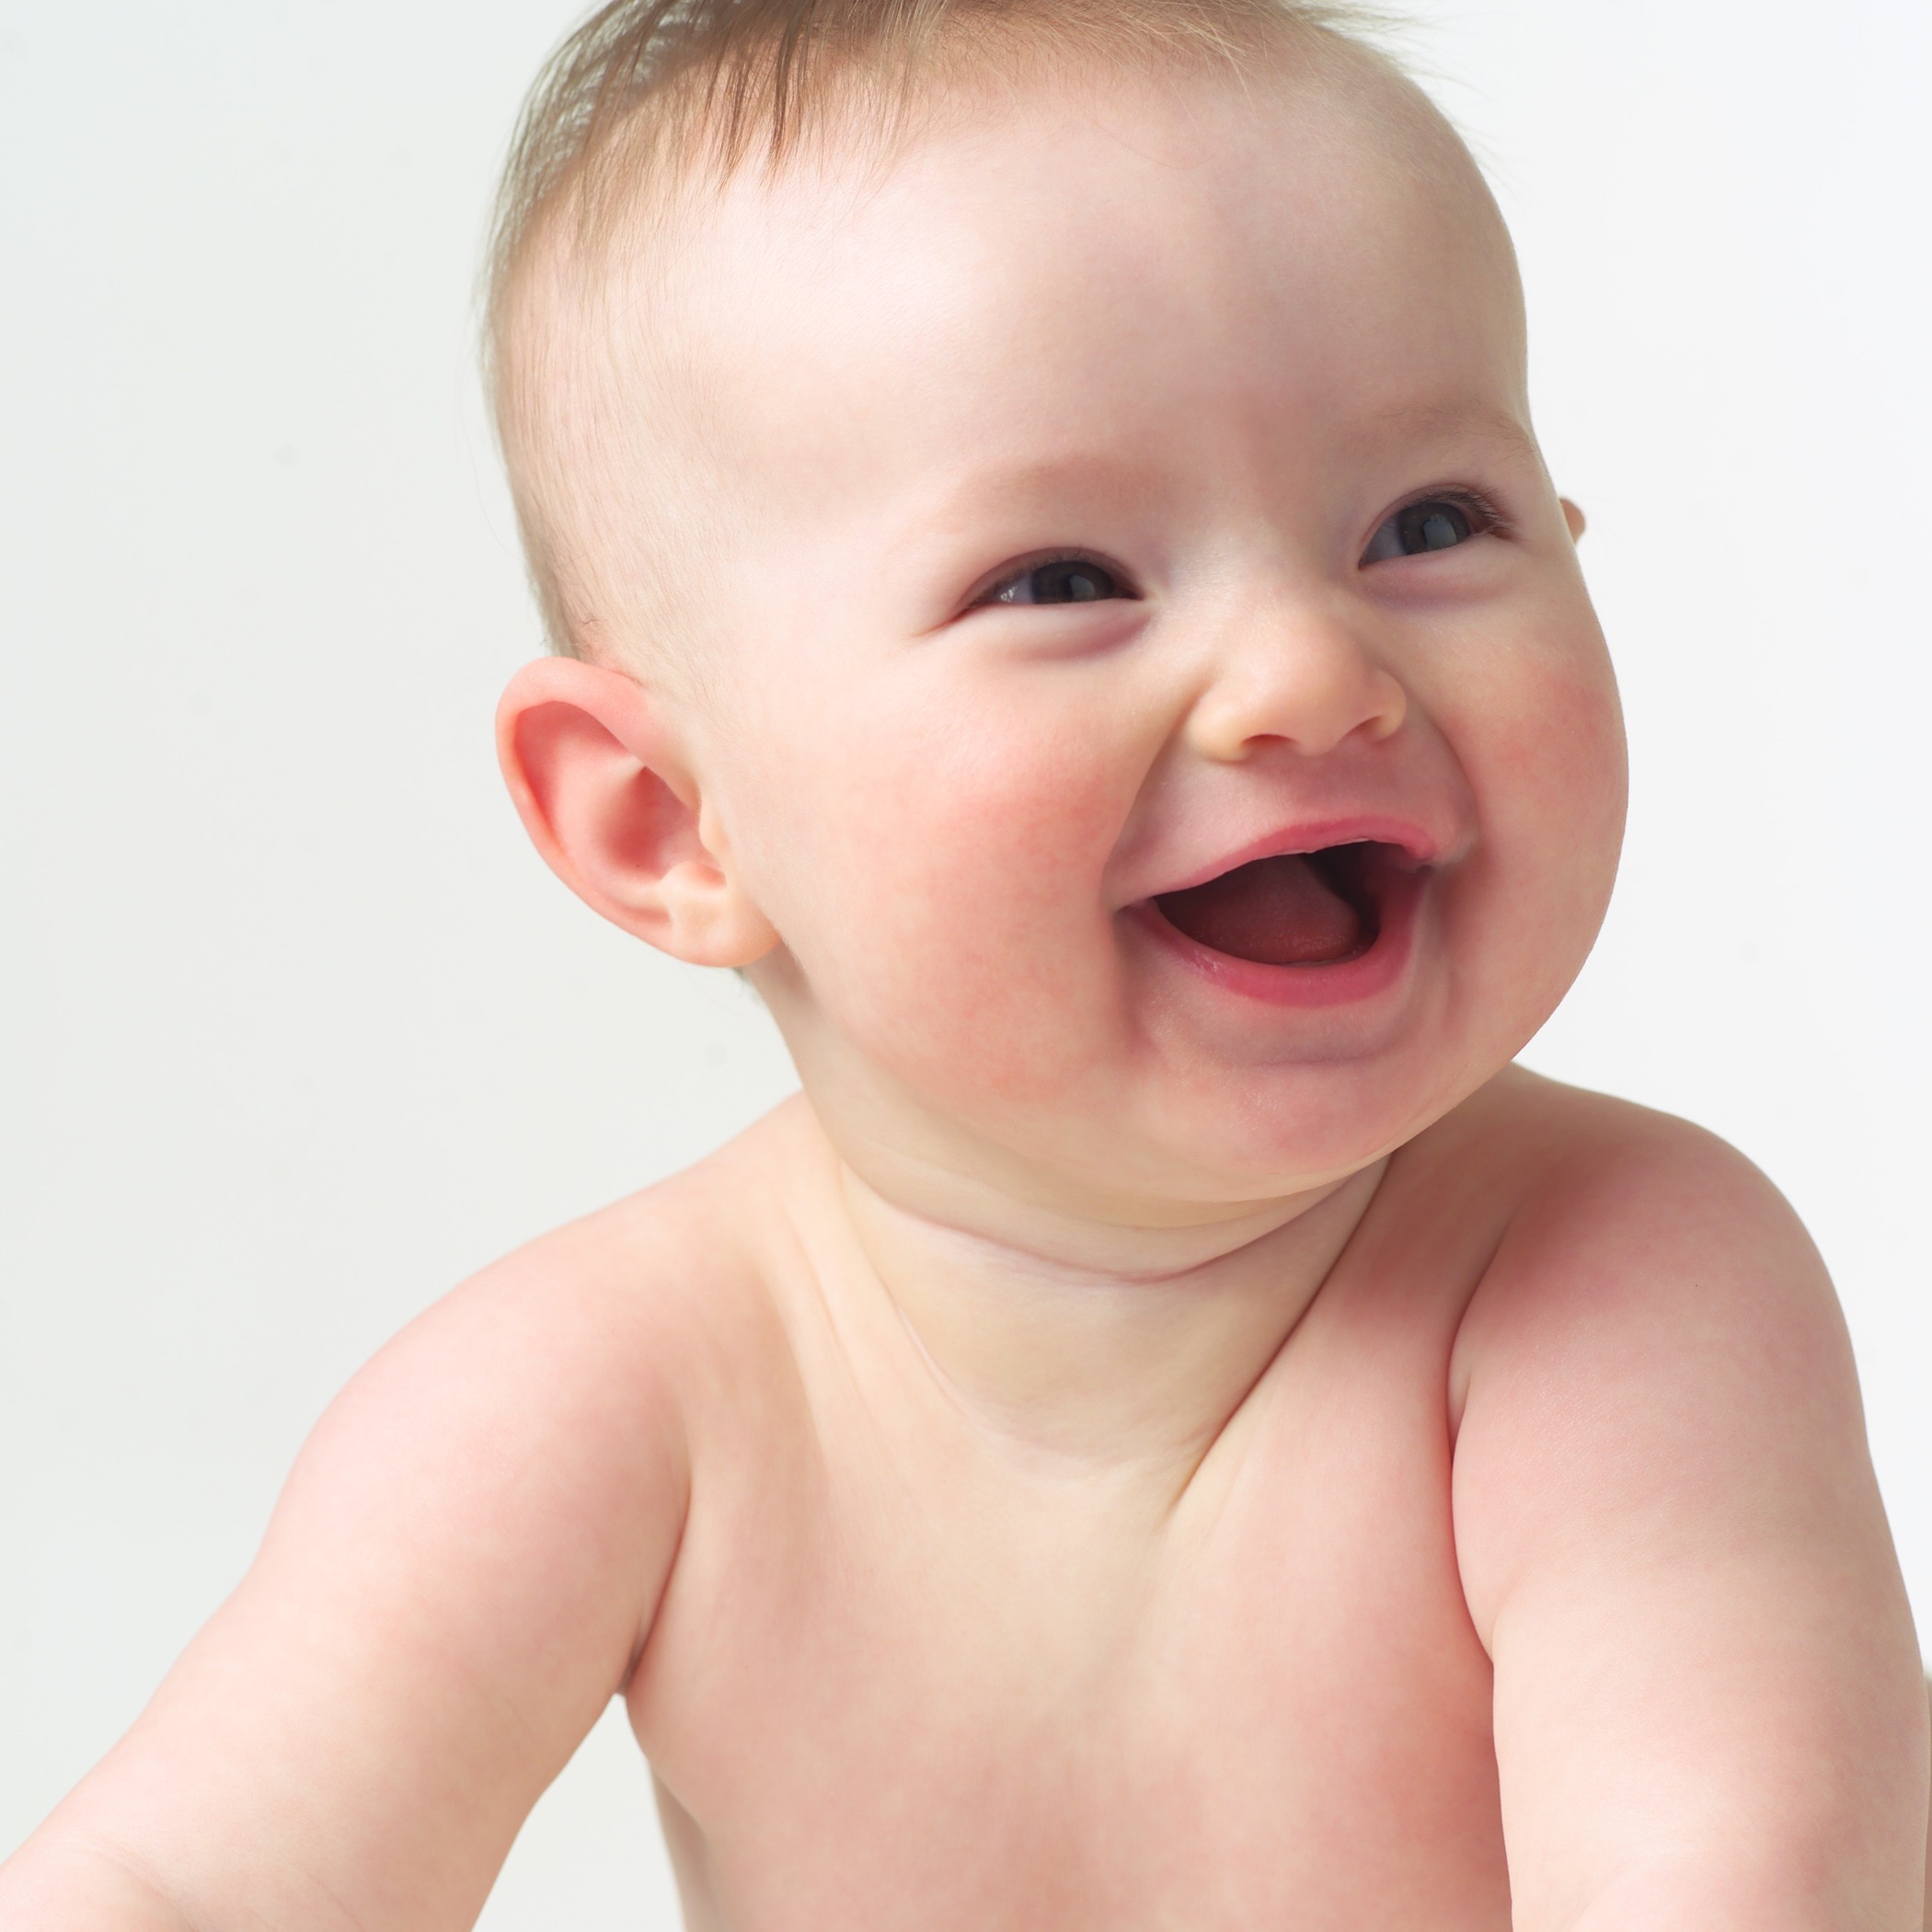 funny and laugh: photos of babies laughing